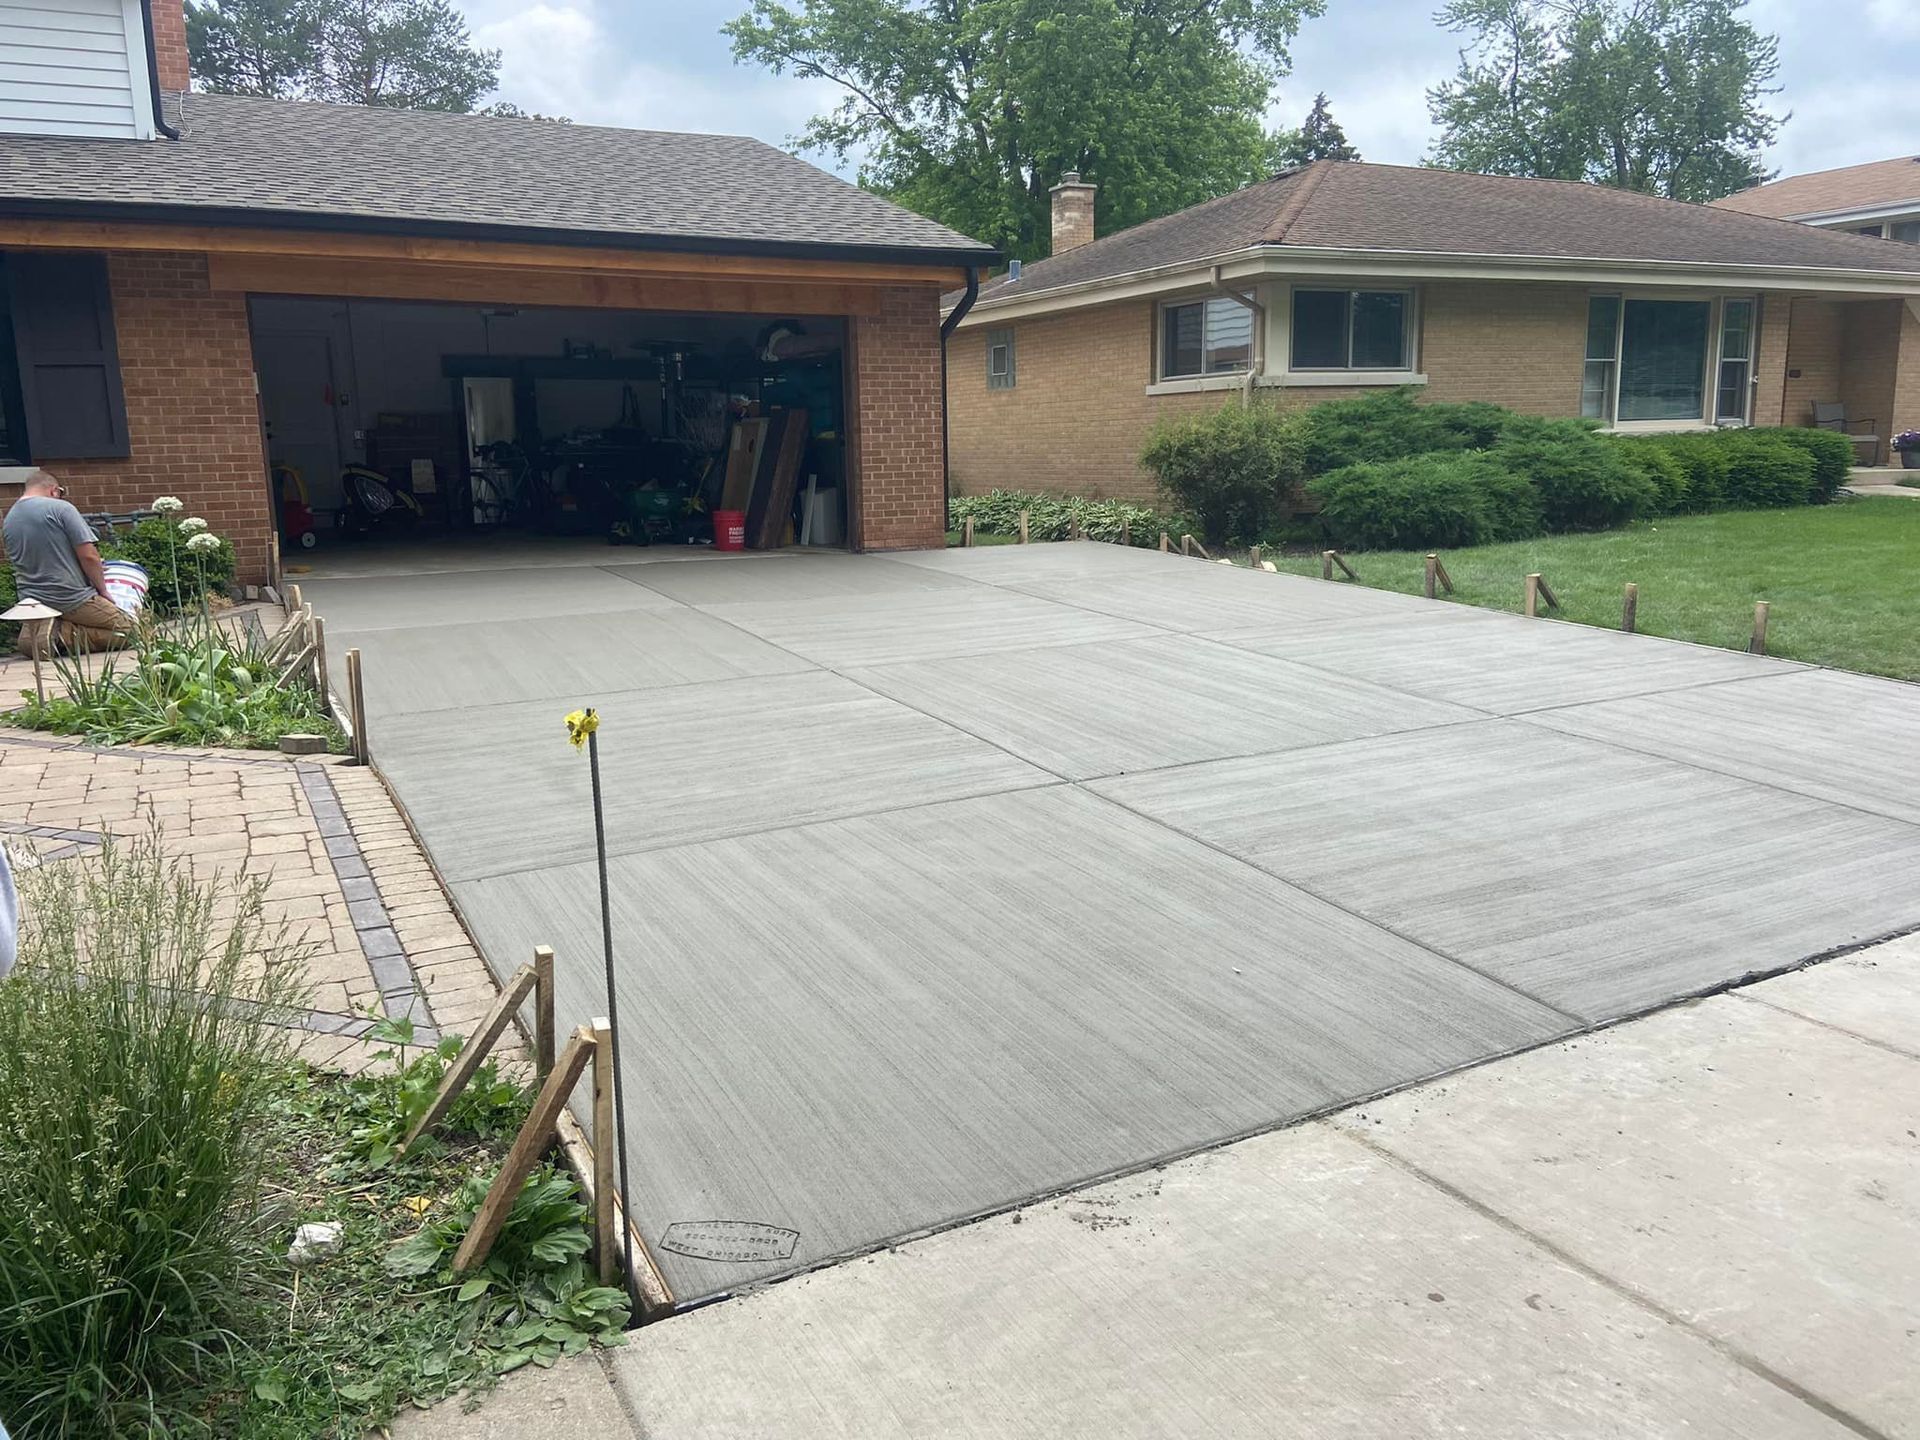 Concrete driveway with brush finish and 12 total concrete slabs